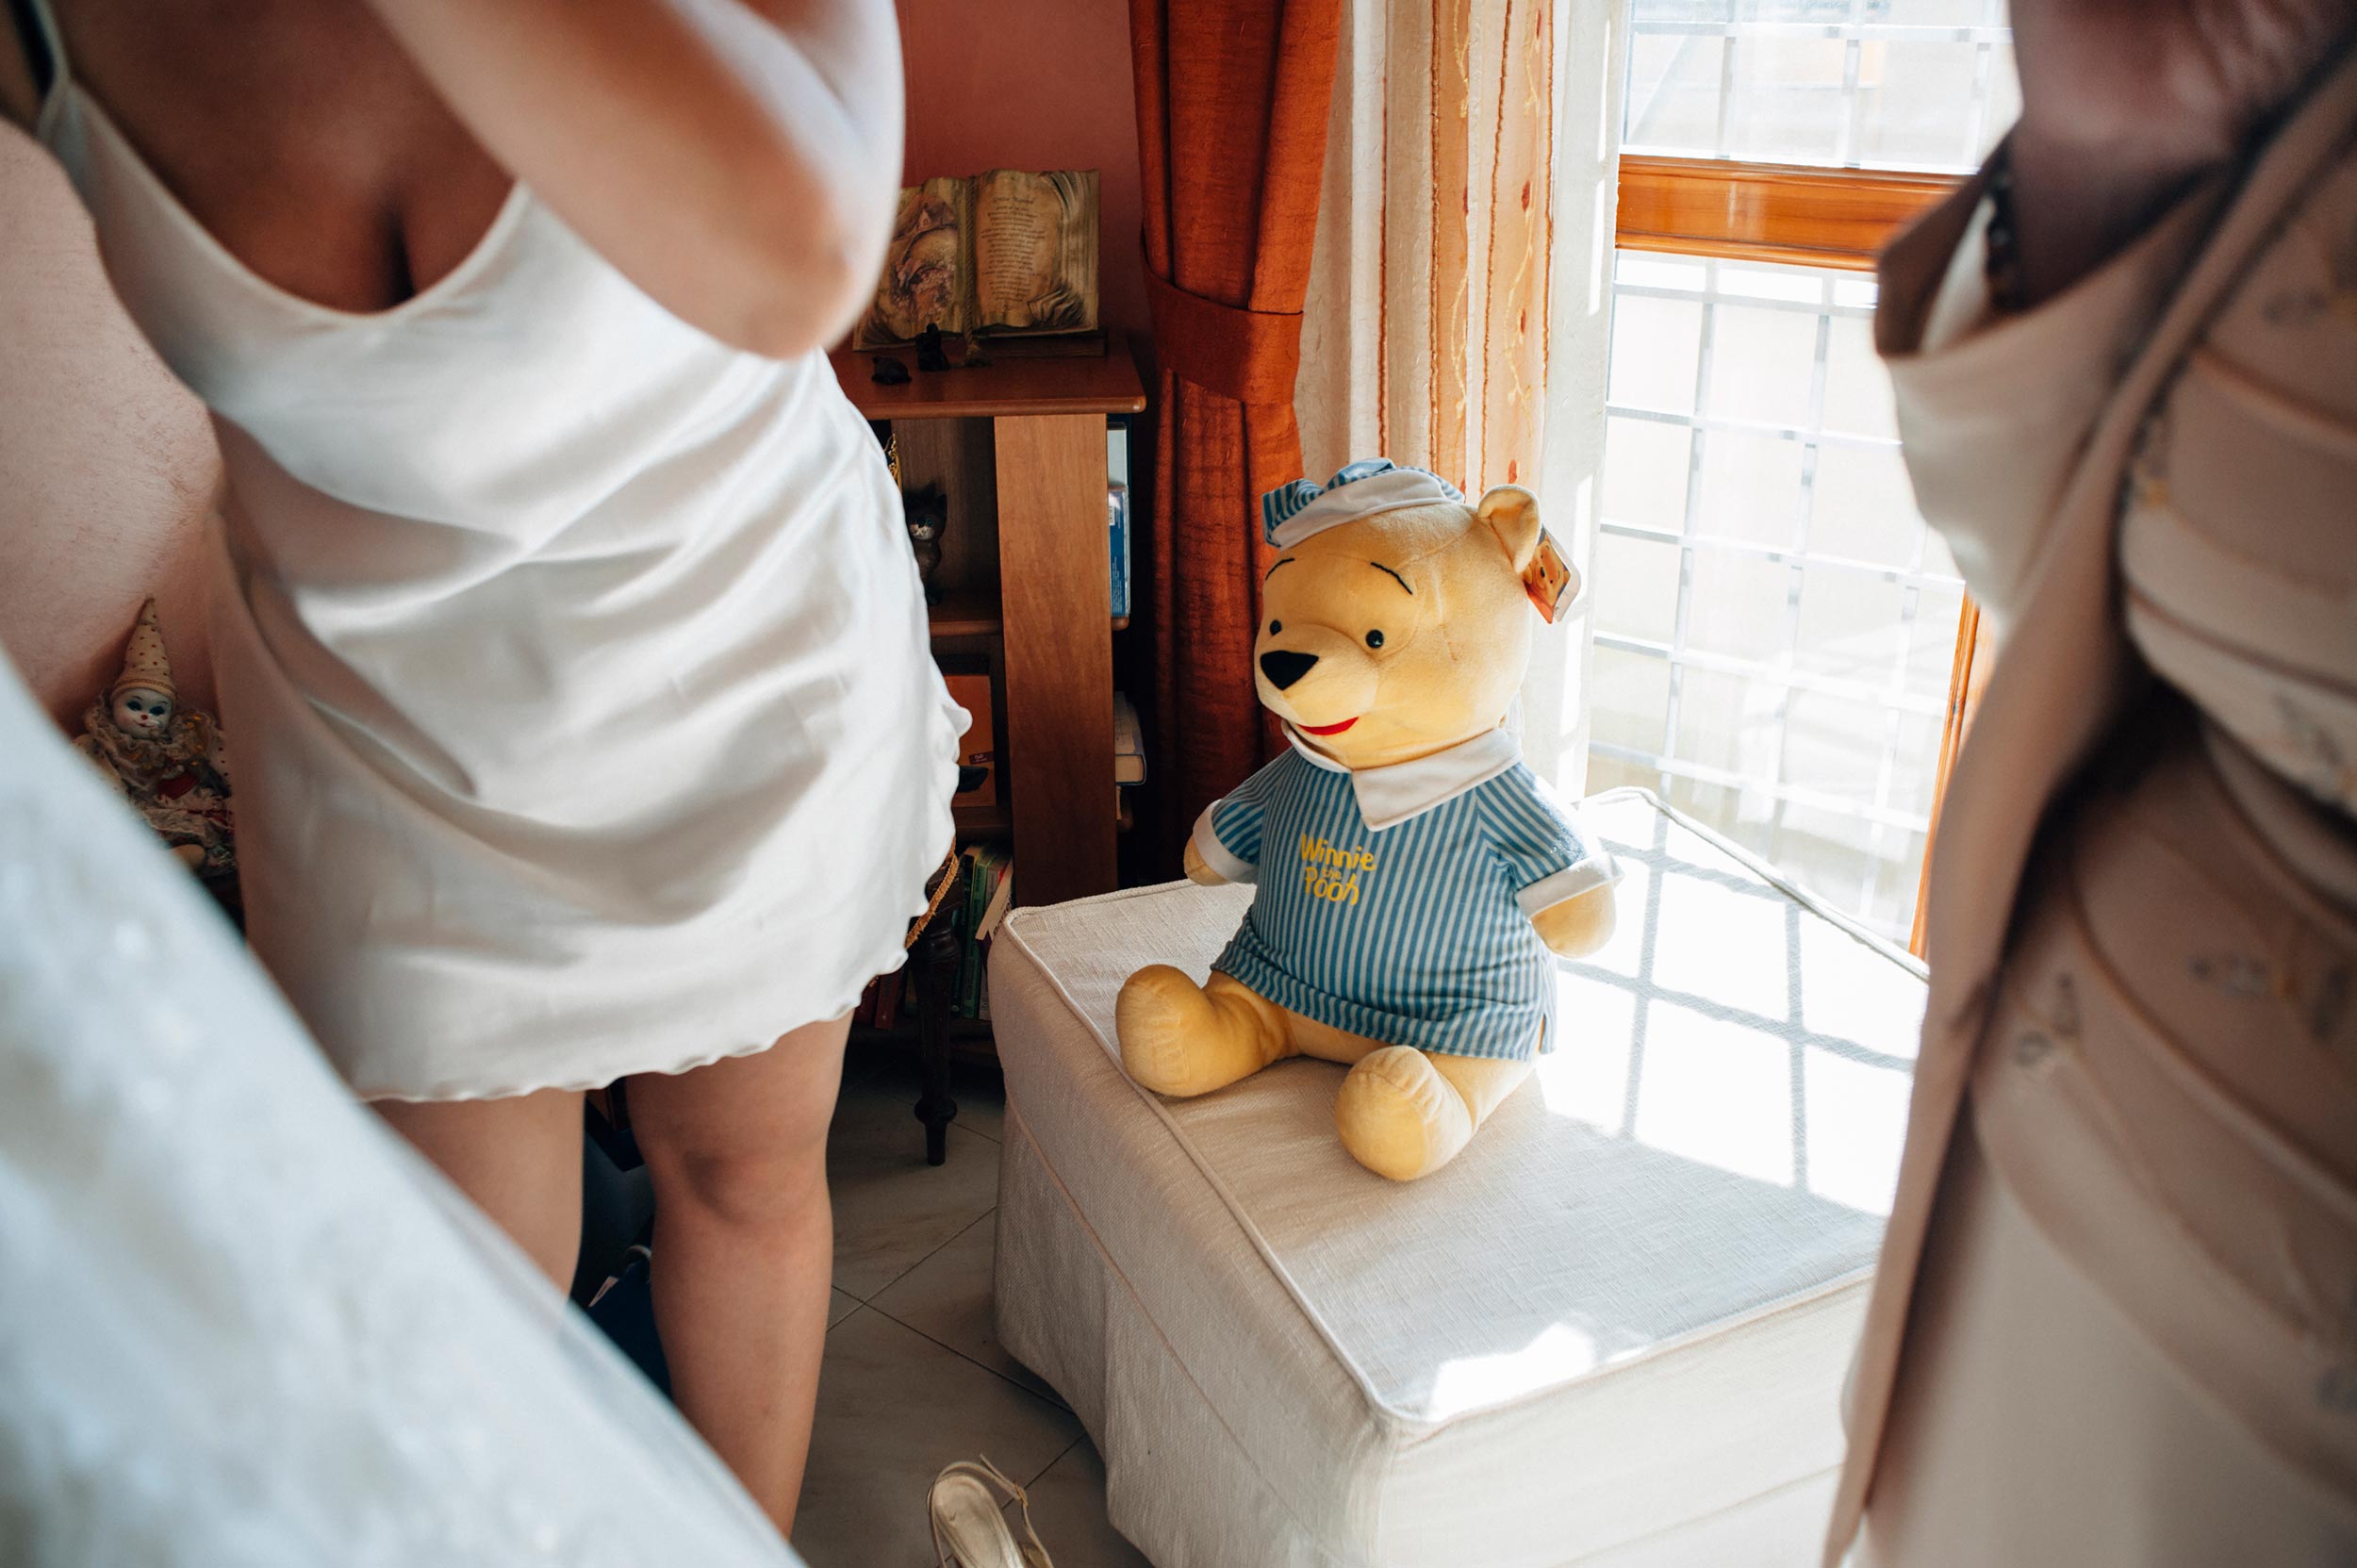 astonished-winnie-the-pooh-looks-at-the-bride-getting-ready-in-underwear.jpg